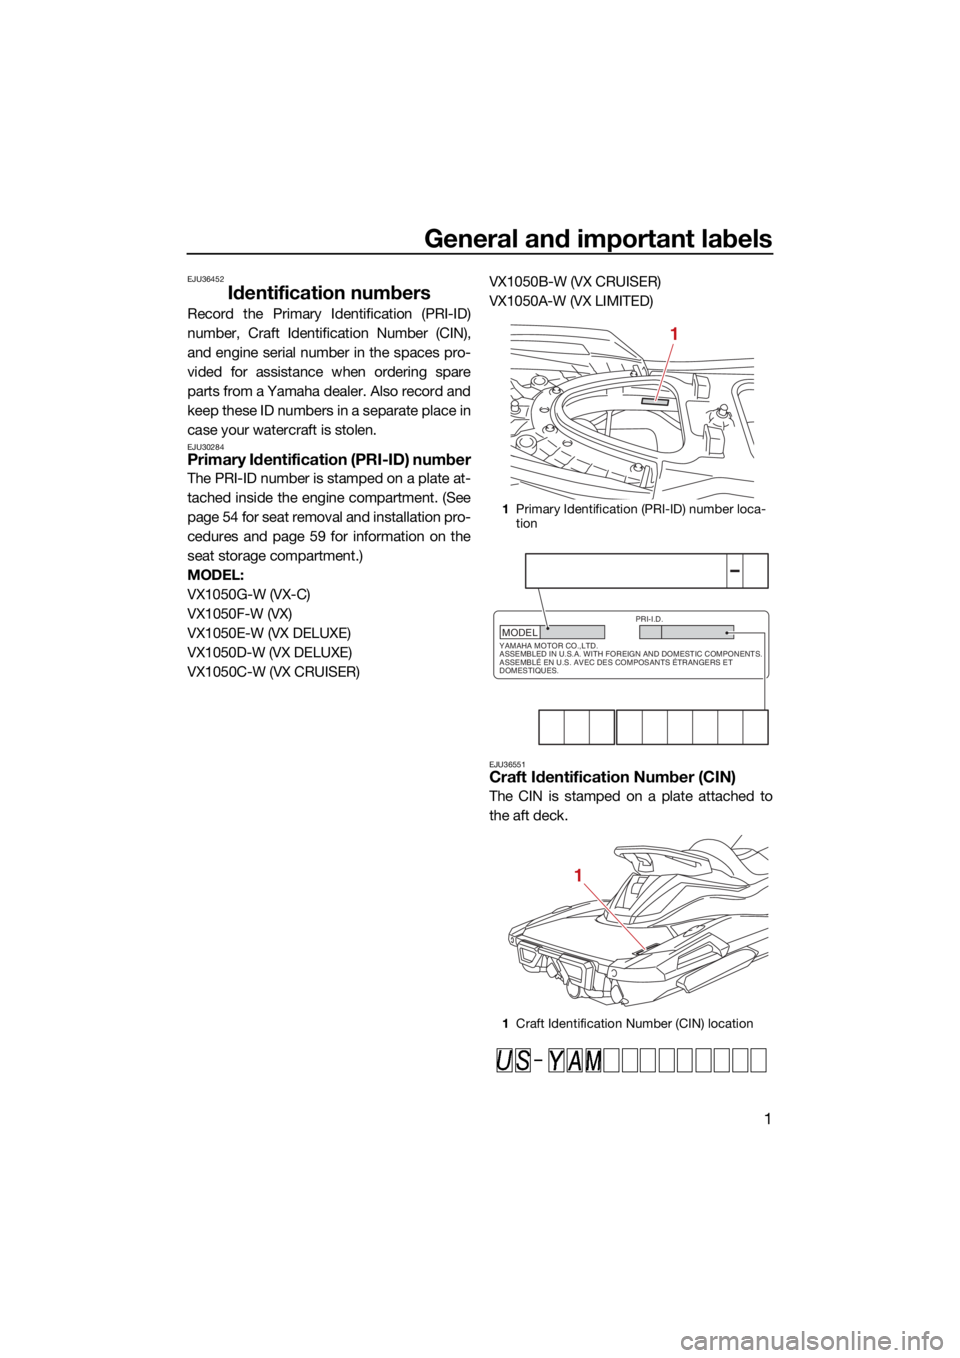 YAMAHA VX CRUISER 2021  Owners Manual General and important labels
1
EJU36452
Identification numbers
Record the Primary Identification (PRI-ID)
number, Craft Identification Number (CIN),
and engine serial number in the spaces pro-
vided f